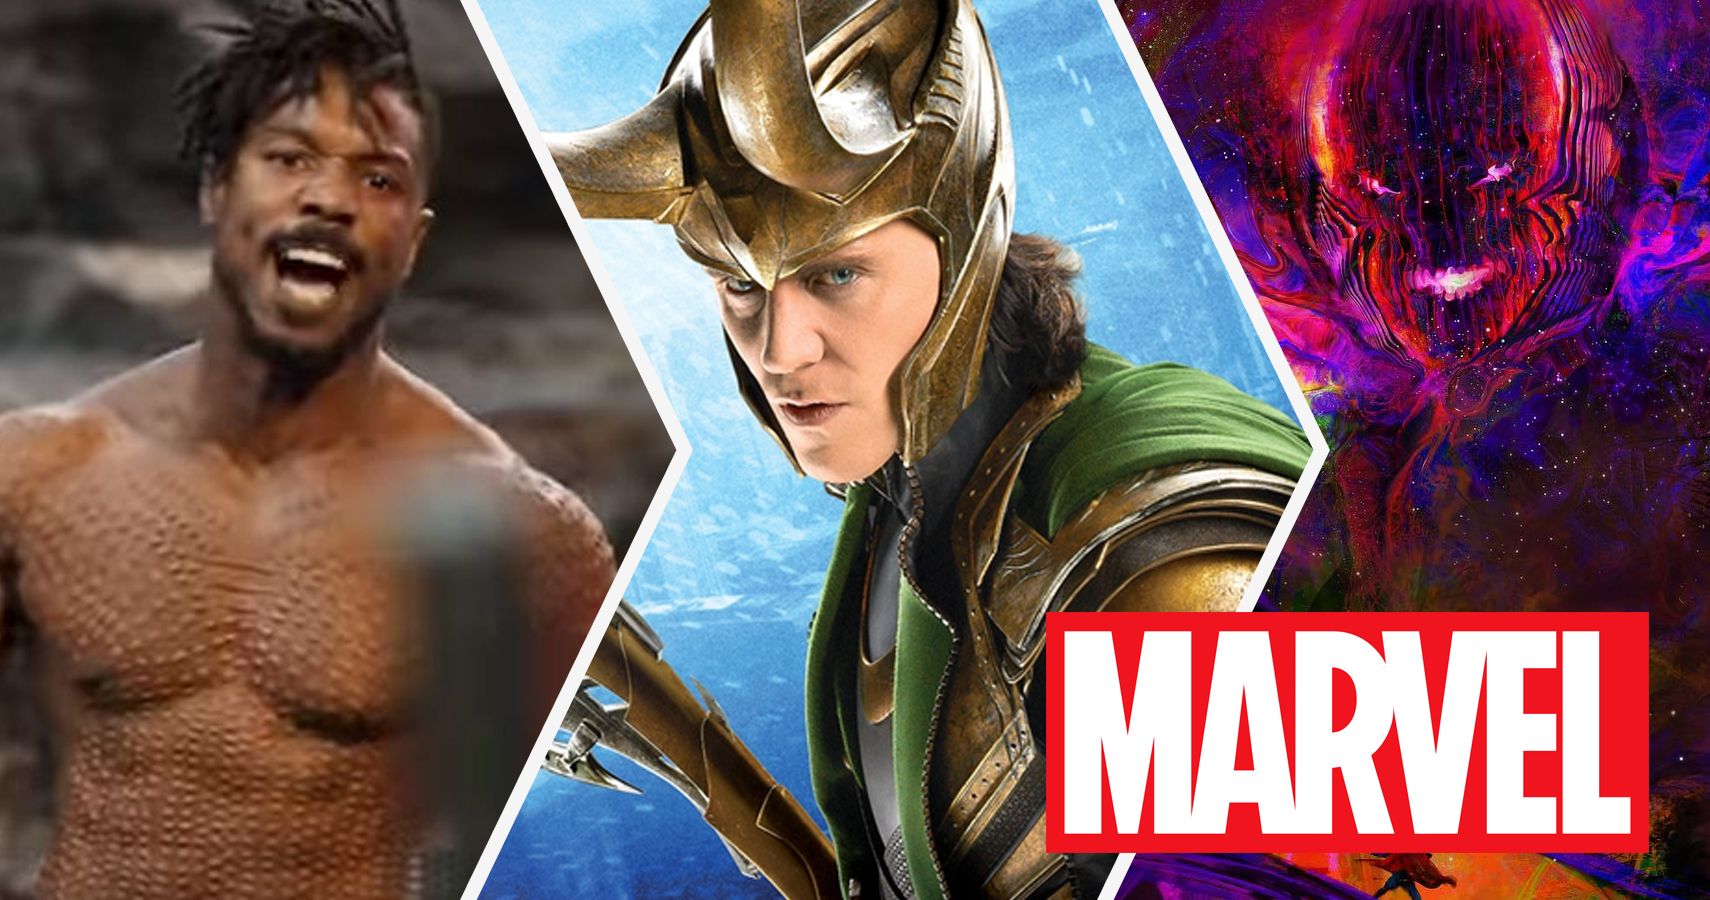 Are Scarlet Witch and Quicksilver in 'The Avengers 2?' - Gen. Discussion -  Comic Vine